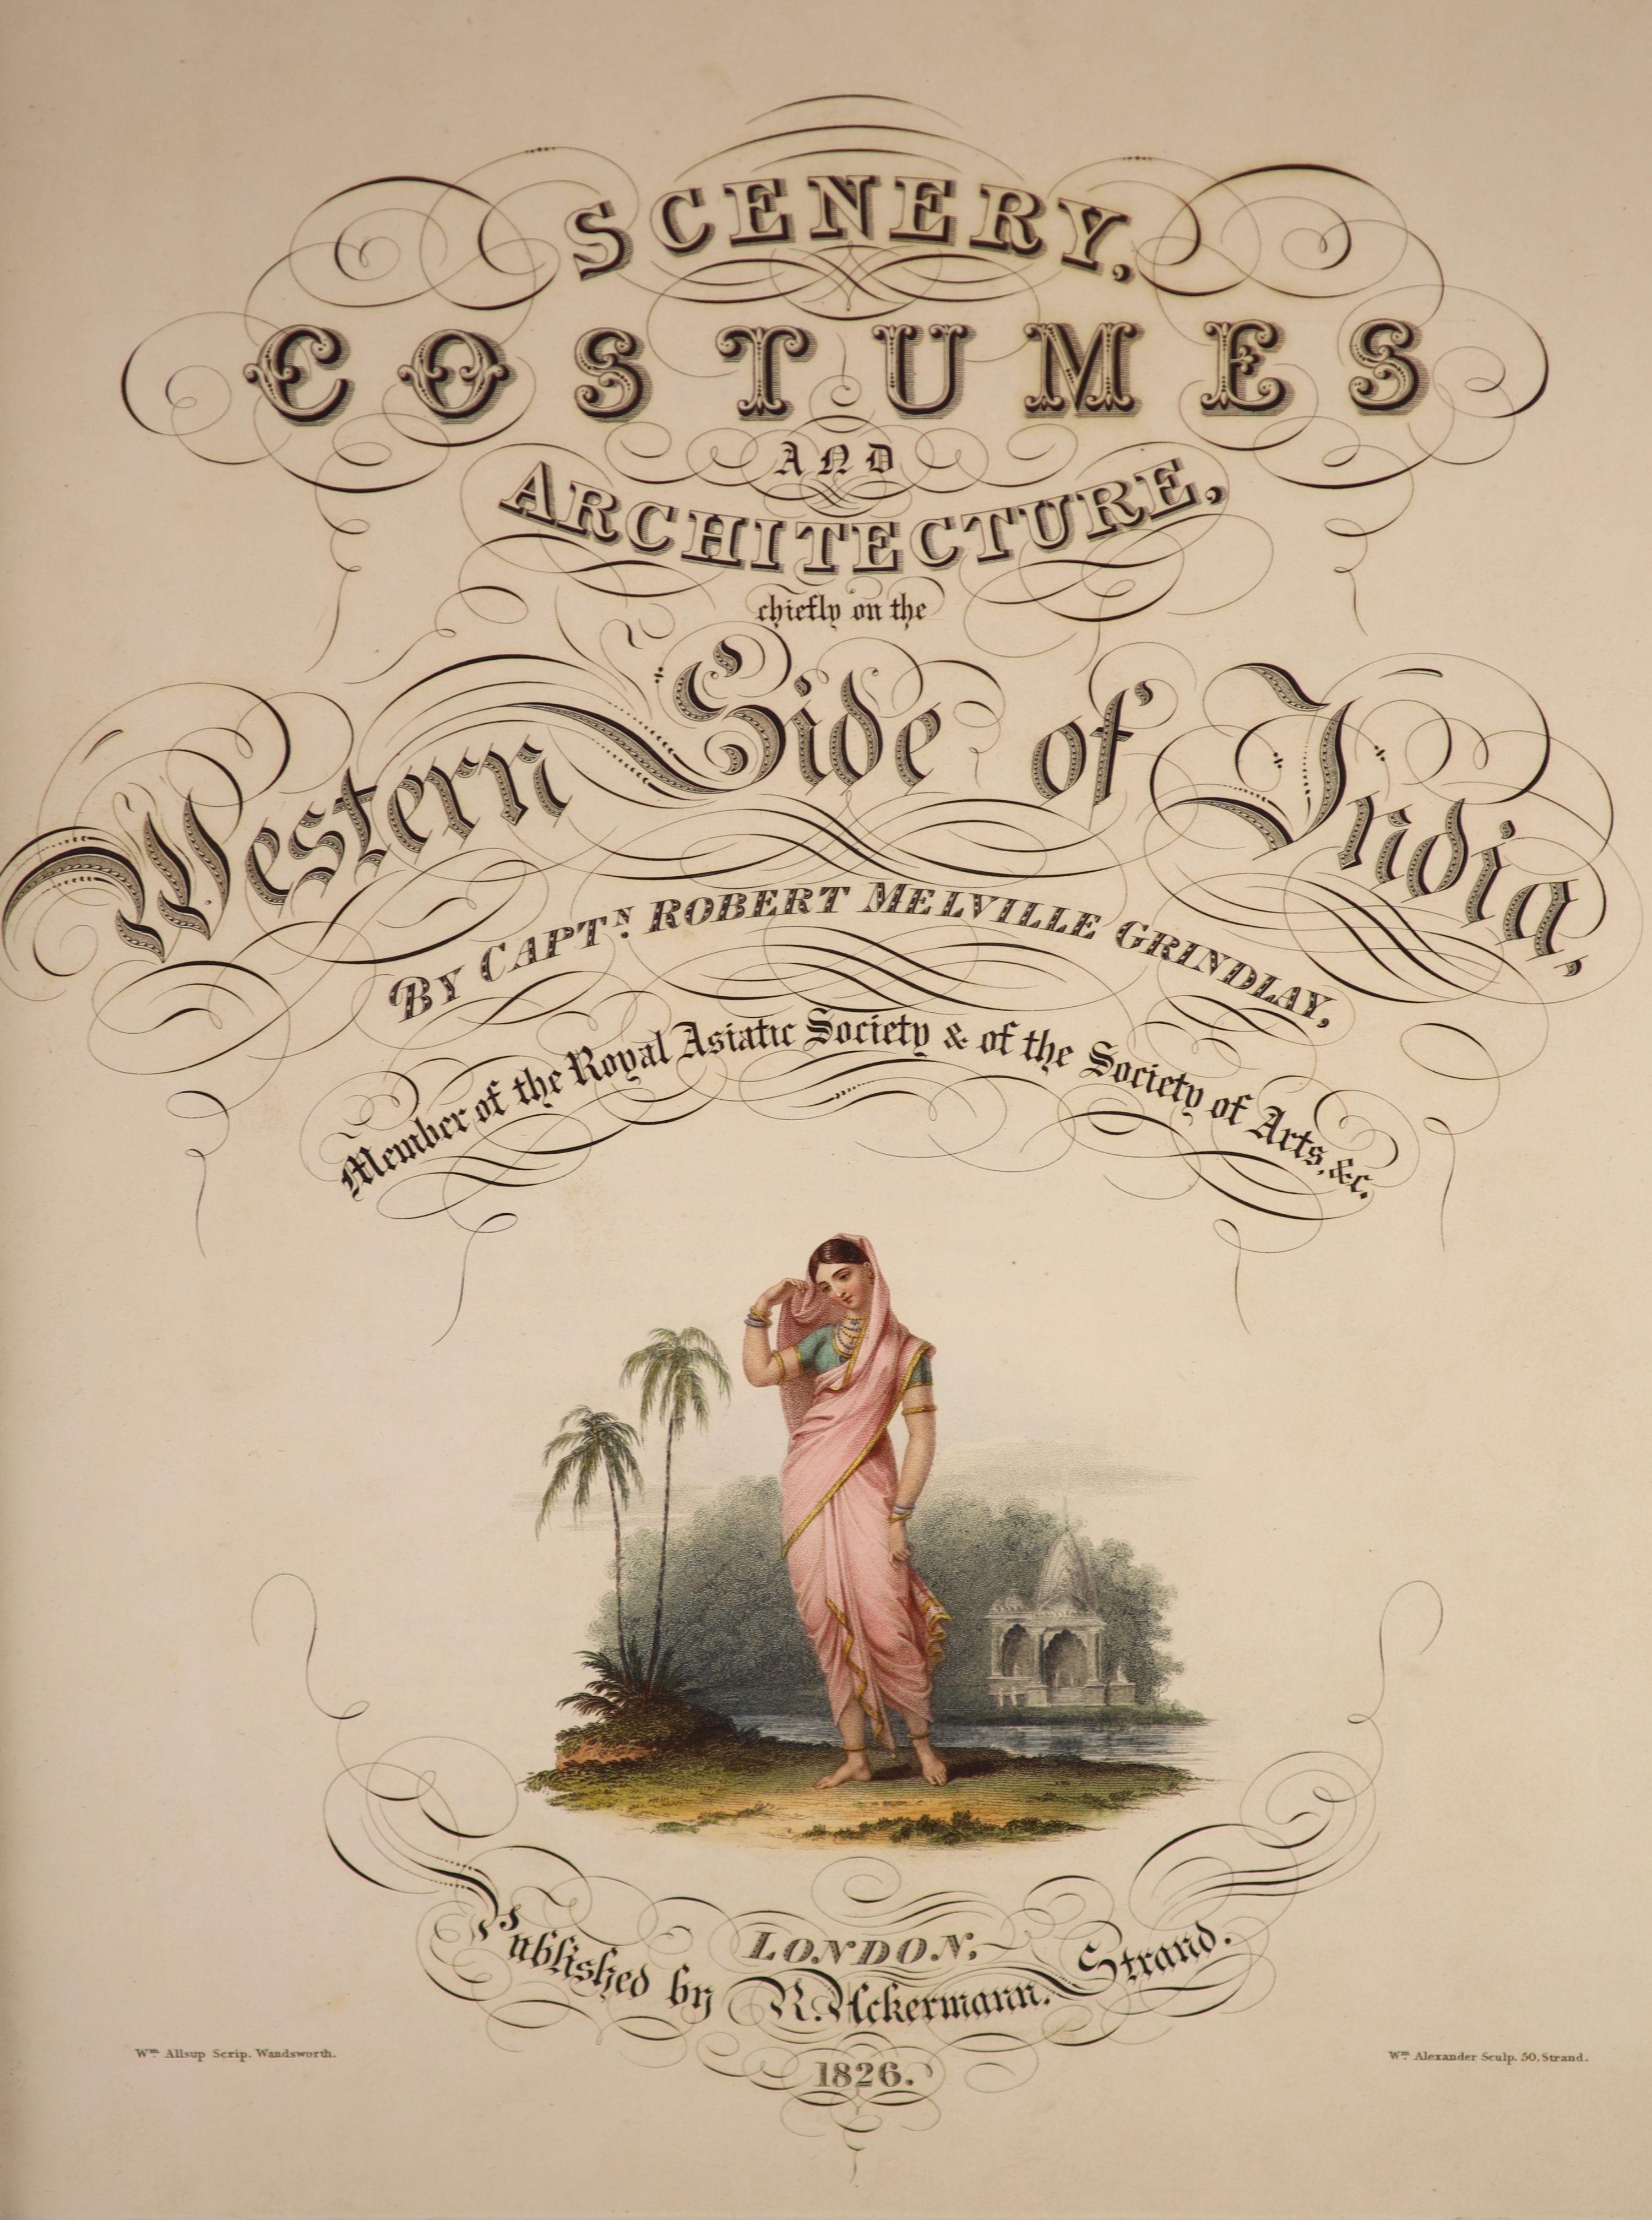 Grindlay, Captain Robert Melville - Scenery, Costumes and Architecture, Chiefly on the Western Side of India, large qto, half green morocco, hand-coloured engraved general title vignette and 36 hand-coloured plates after